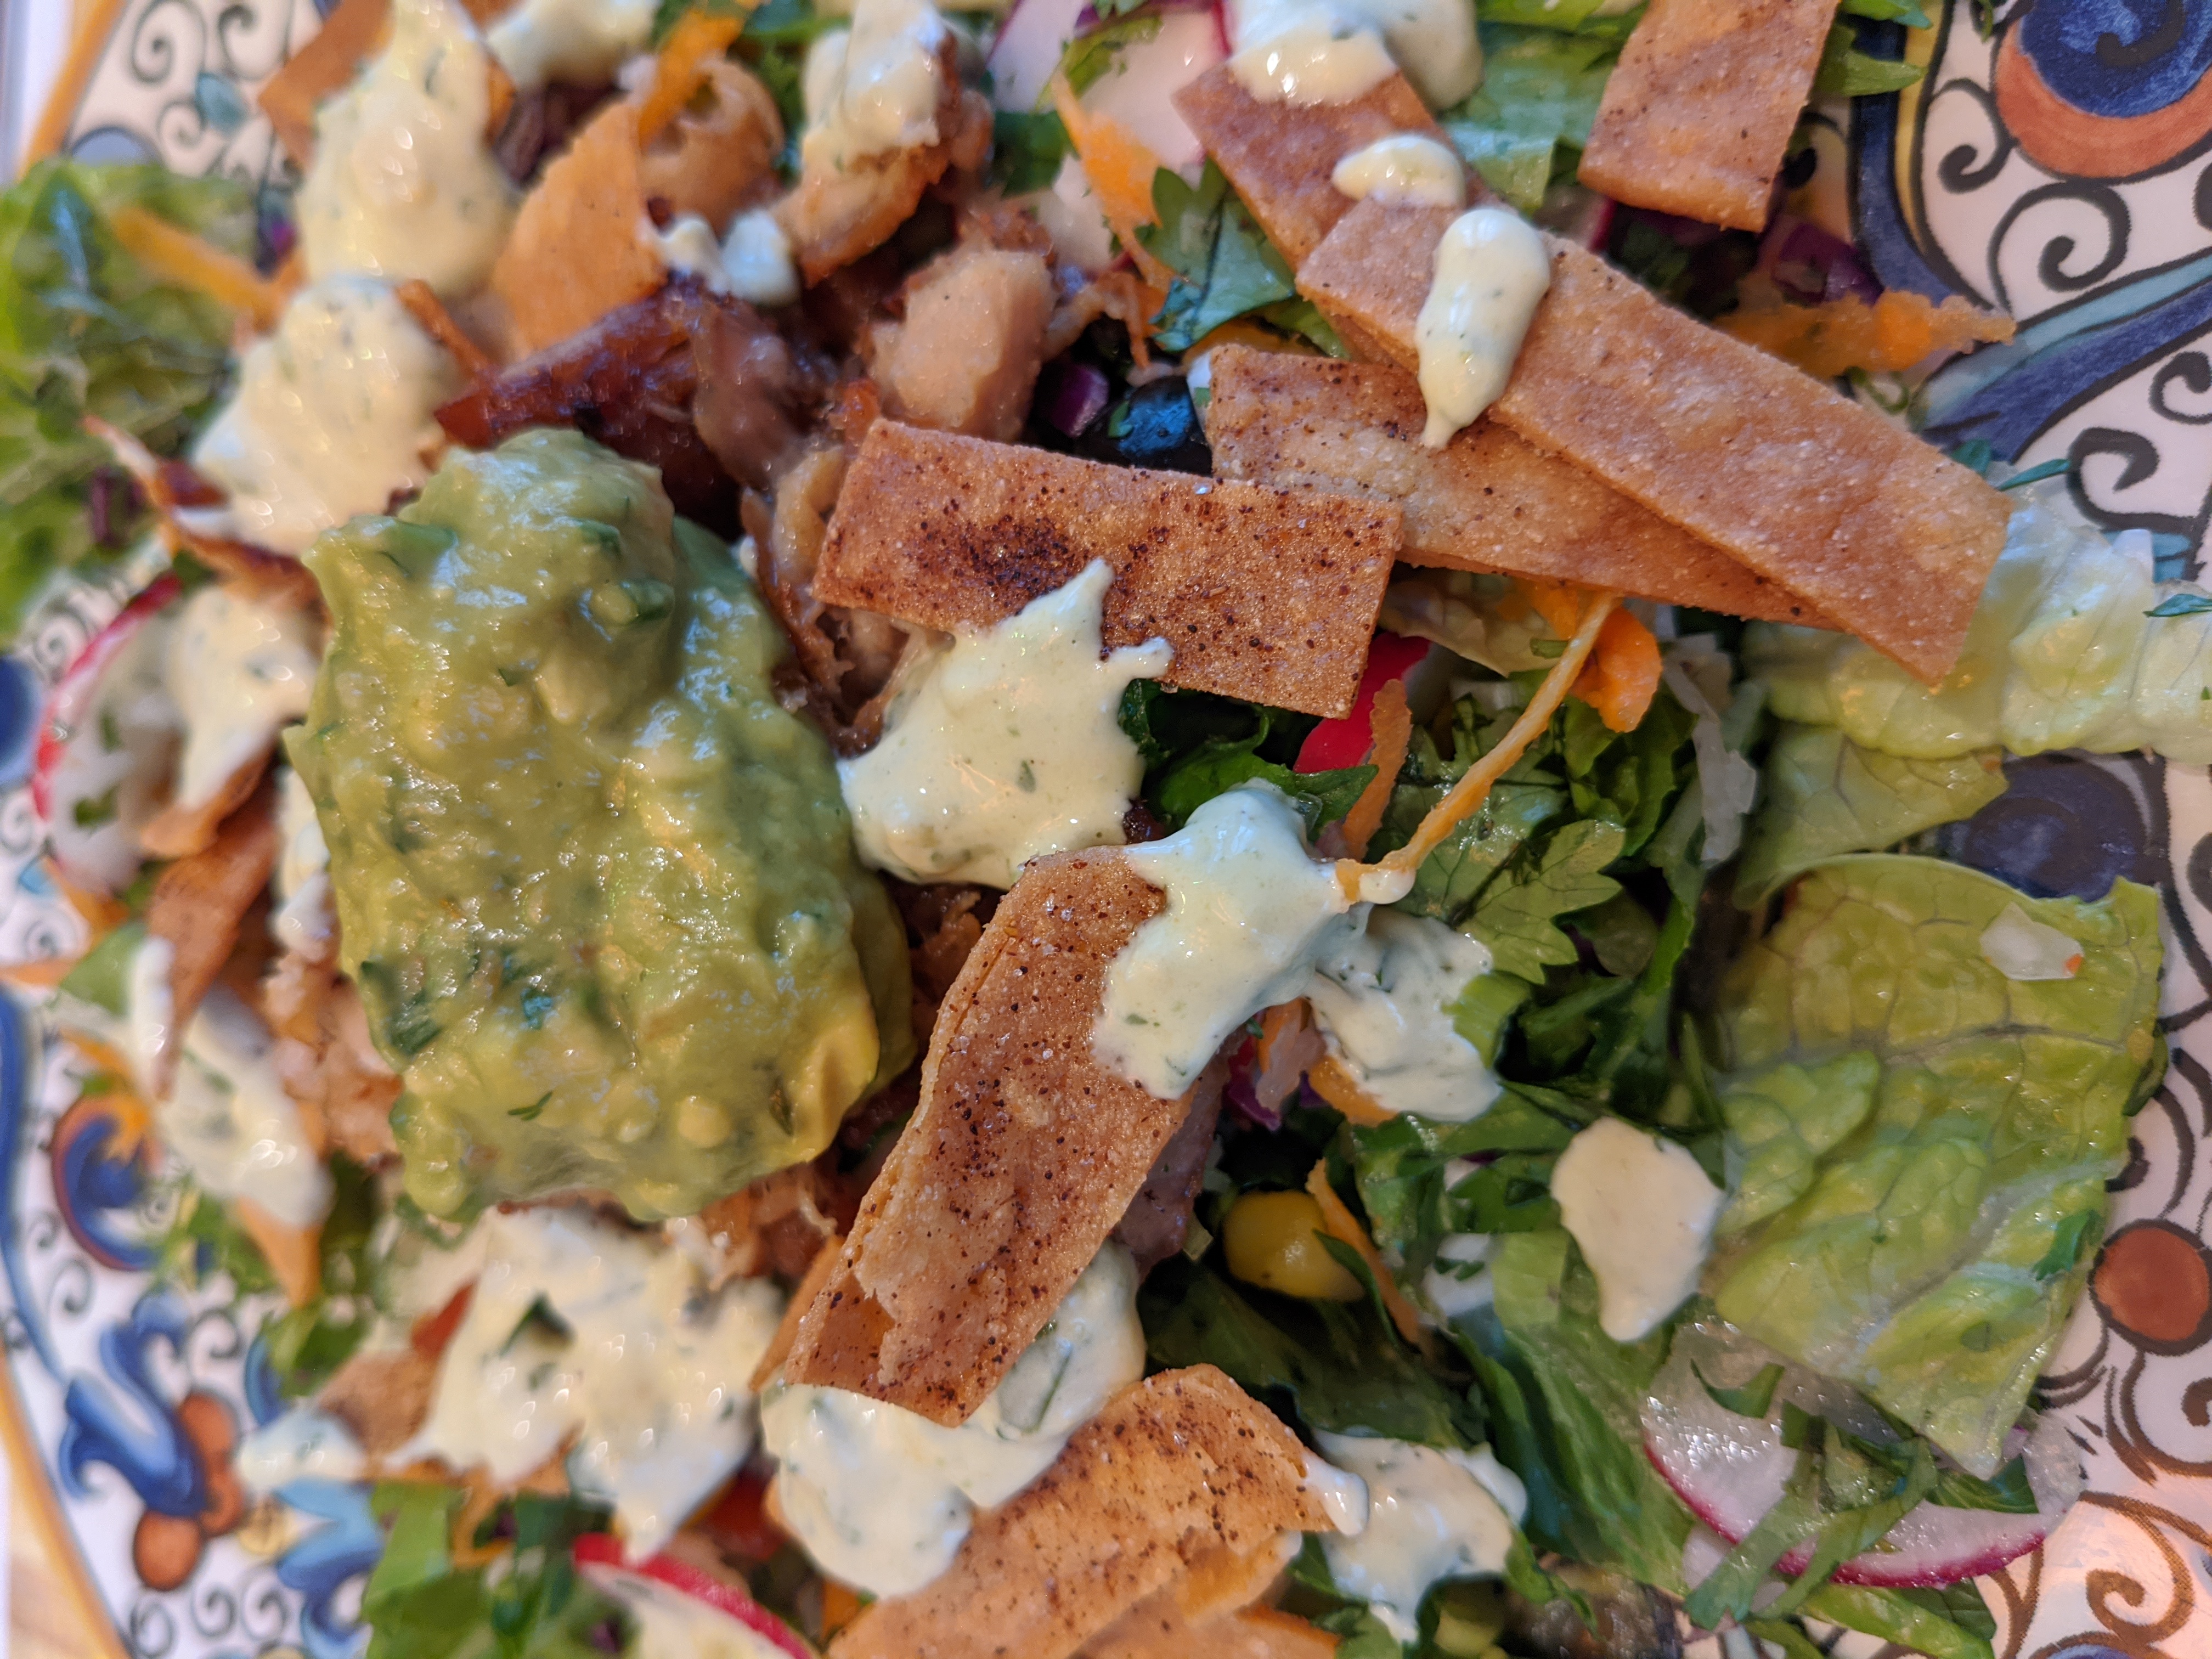 Ranch Salad Dressing with Avocado and Cilantro on a Taco Salad with Carnitas (optional) recipe image